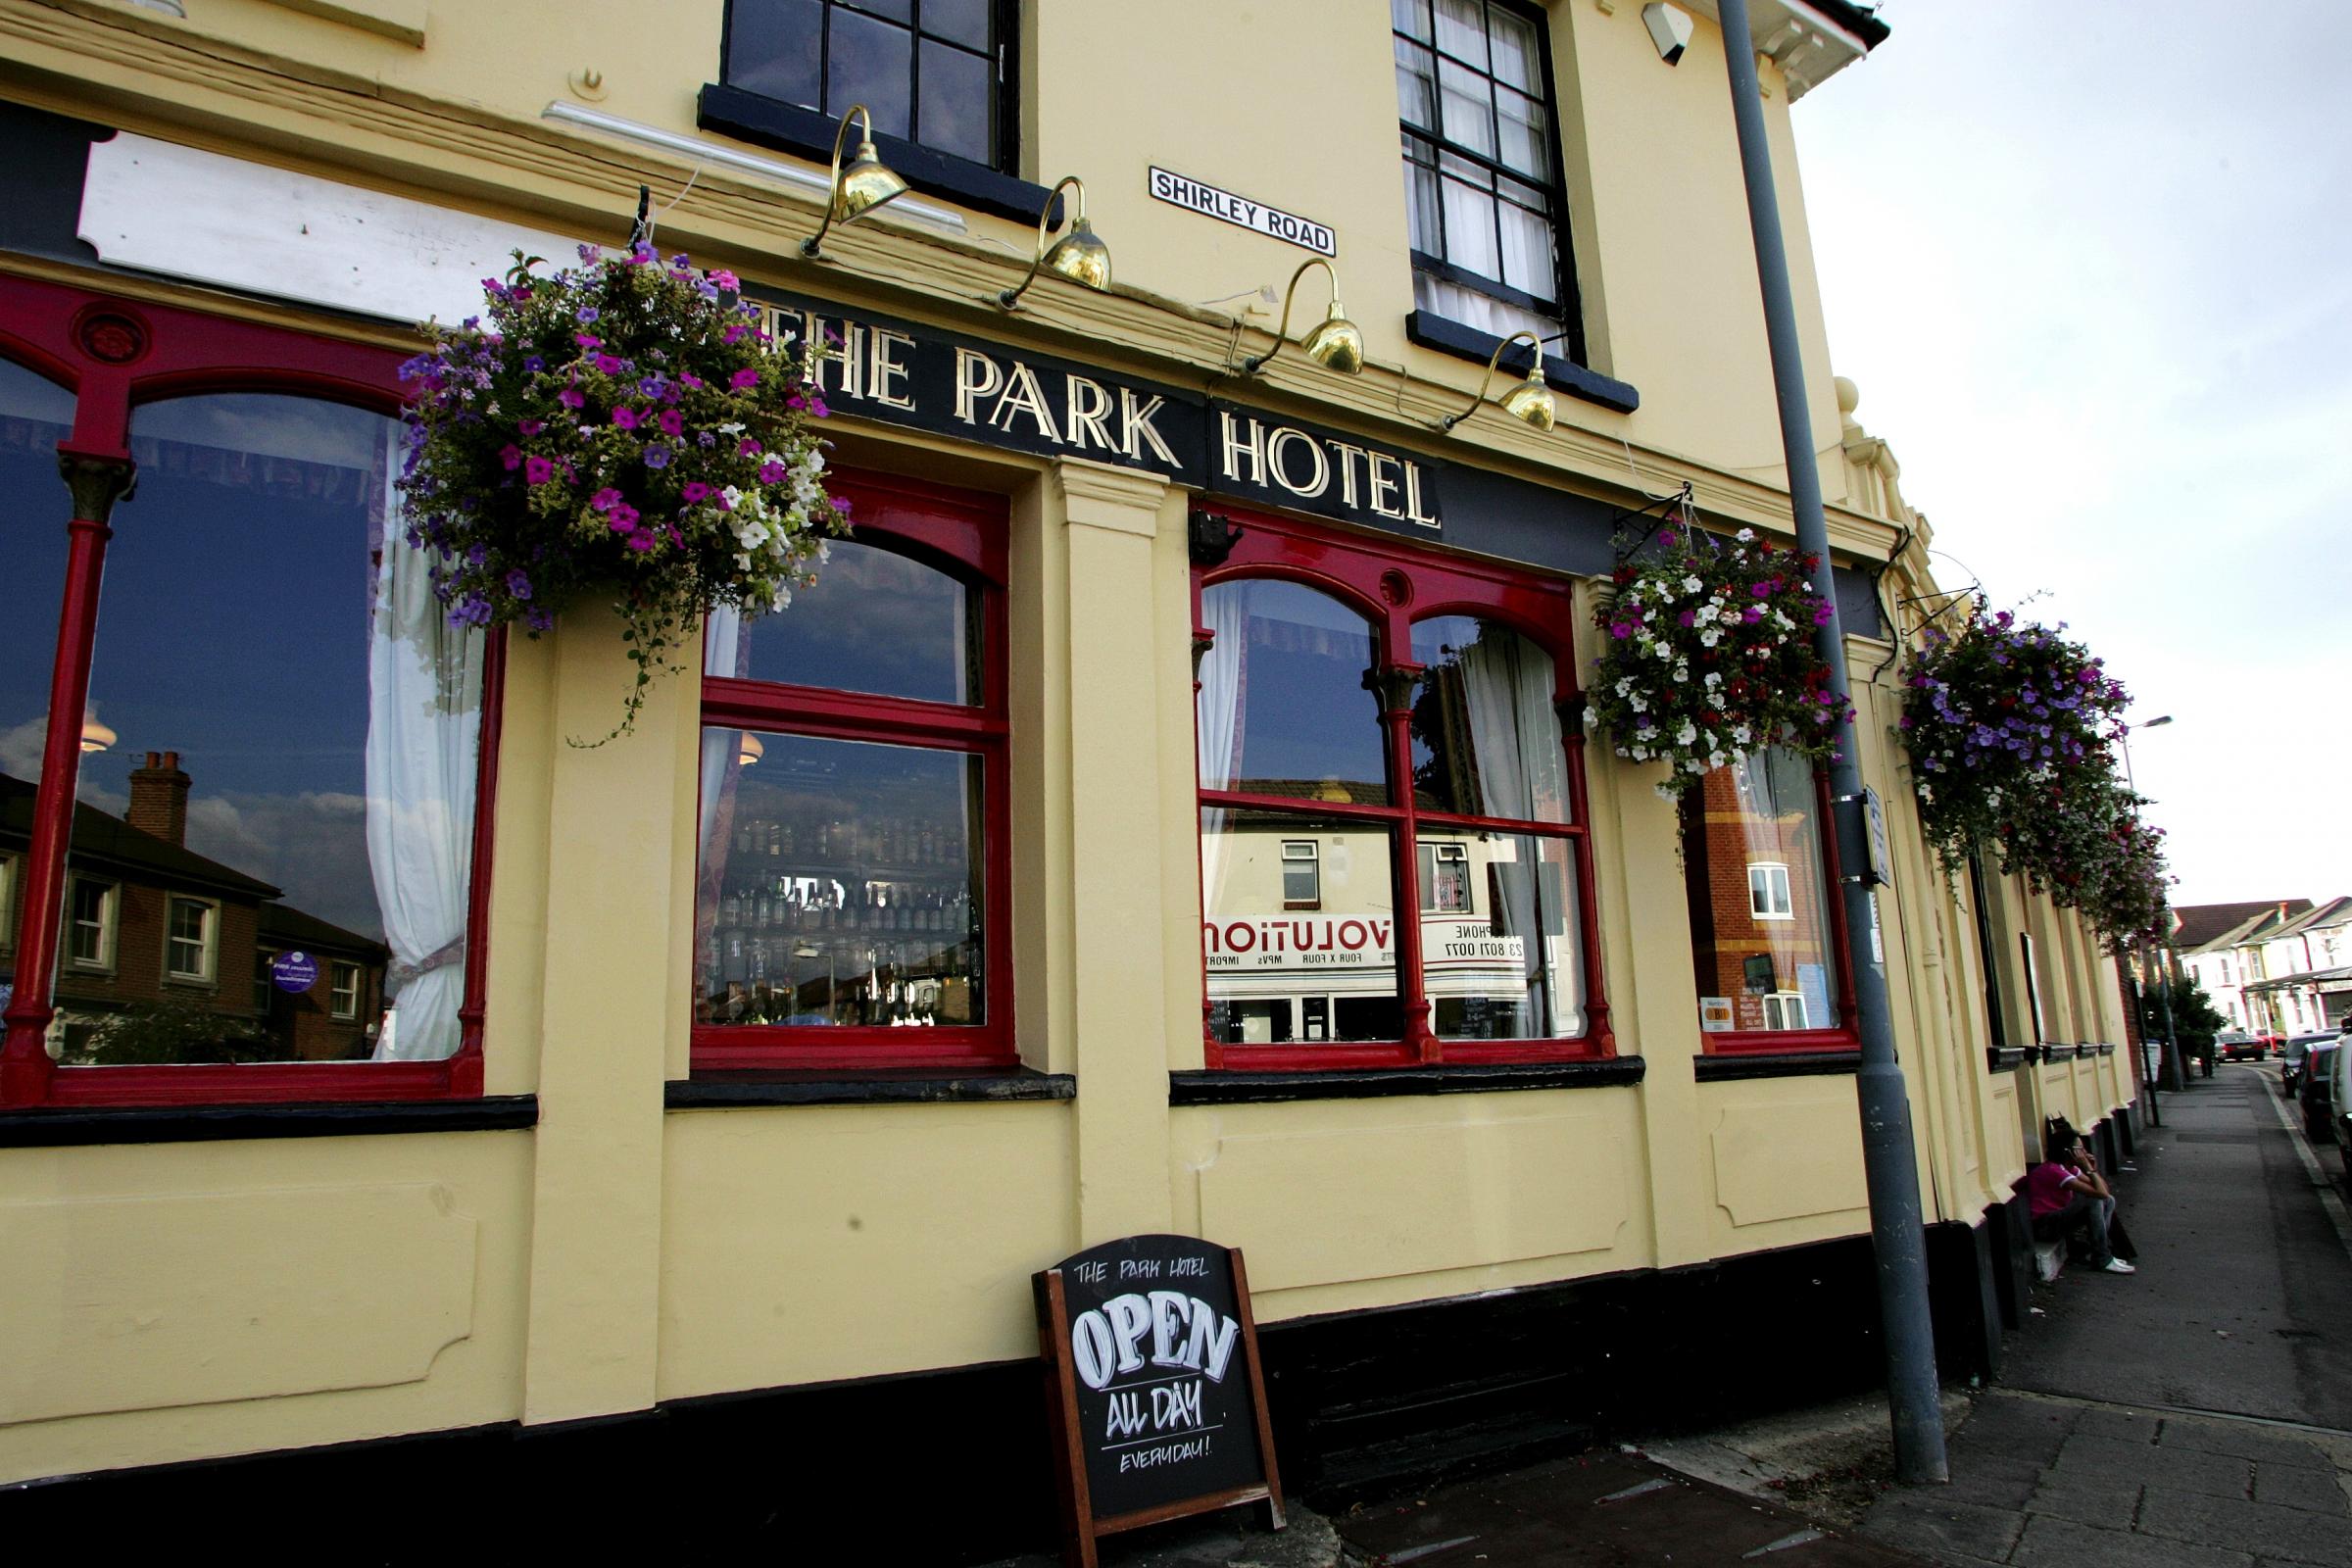 The Park Hotel Shirley Road Pub in bloom comp processed by IntelliTune on 15082005 183122 with script 200dpi only